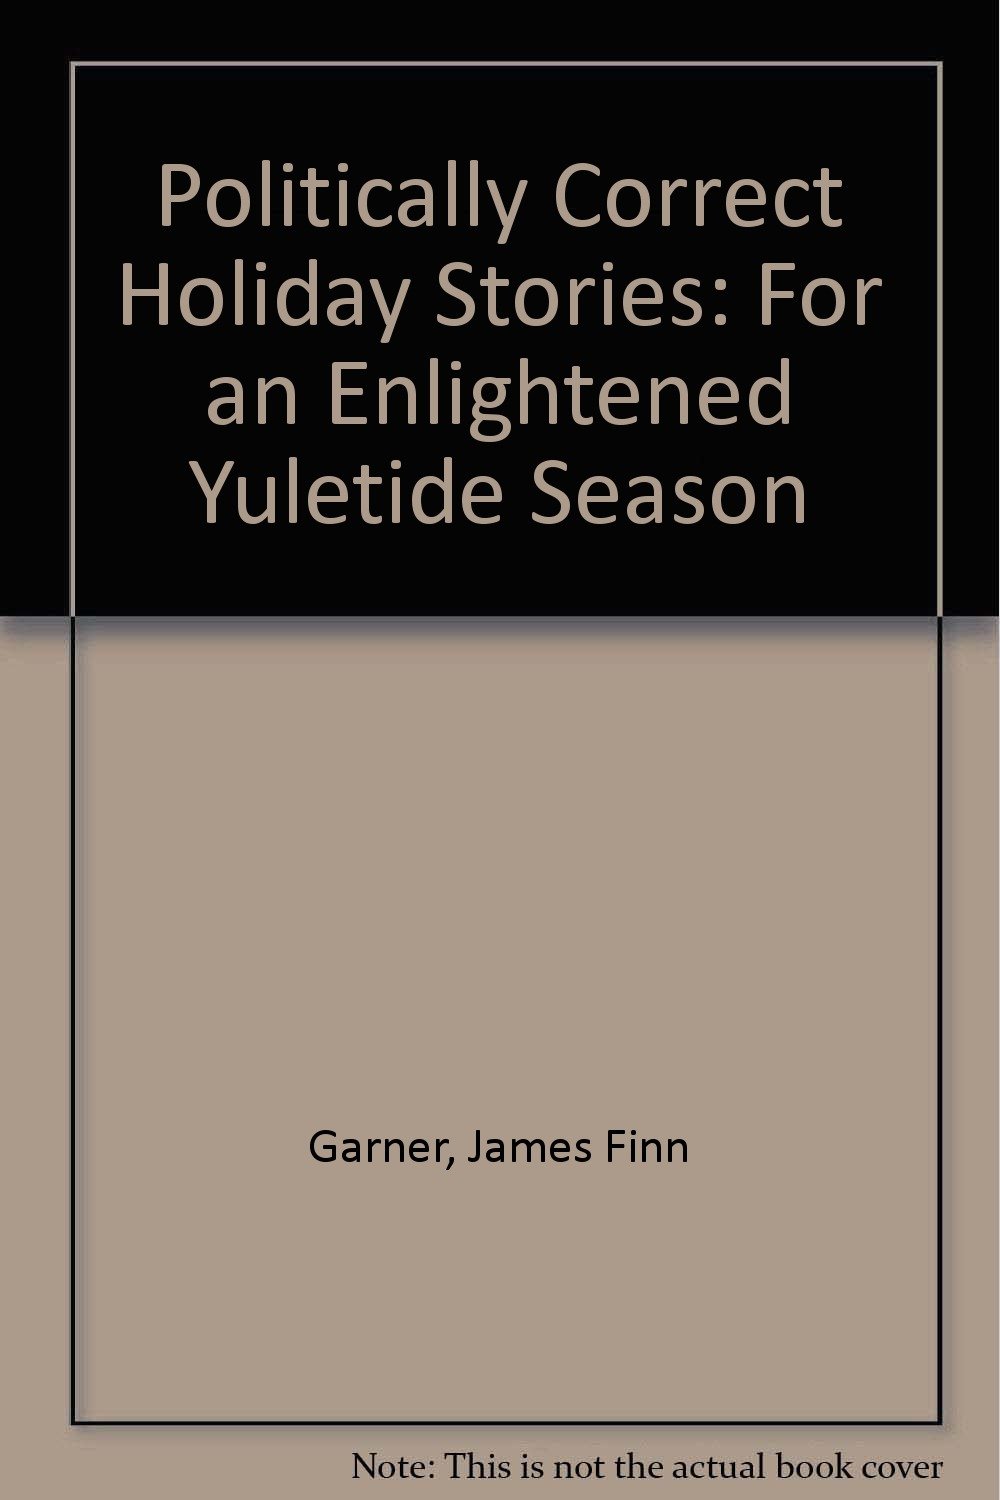 Politically correct holiday stories magazine reviews